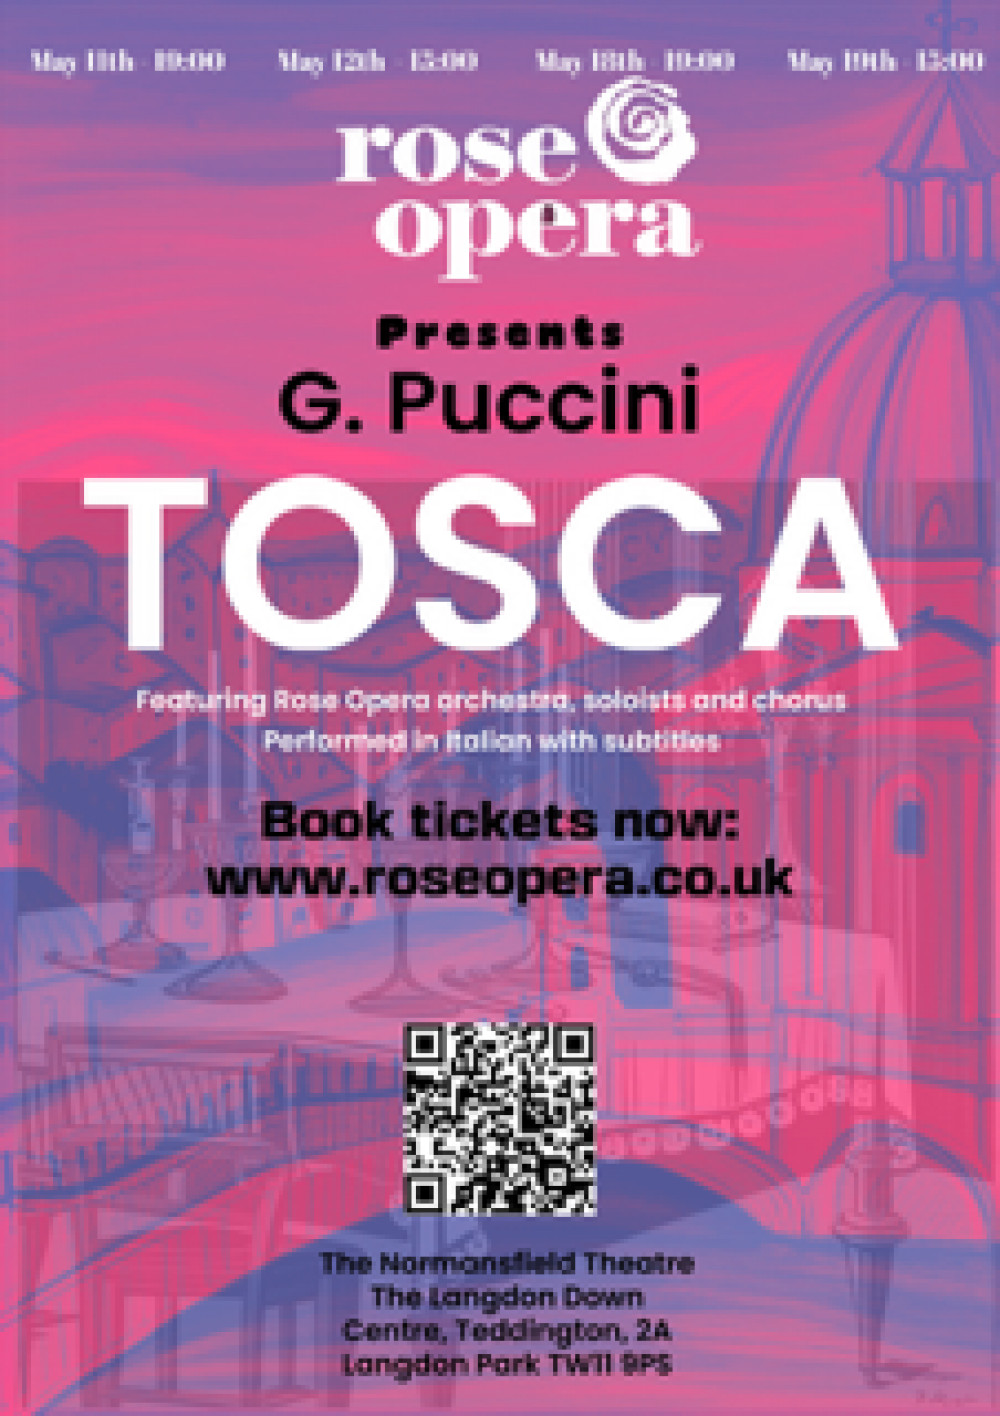 Rose Opera presents Tosca by G. Puccini